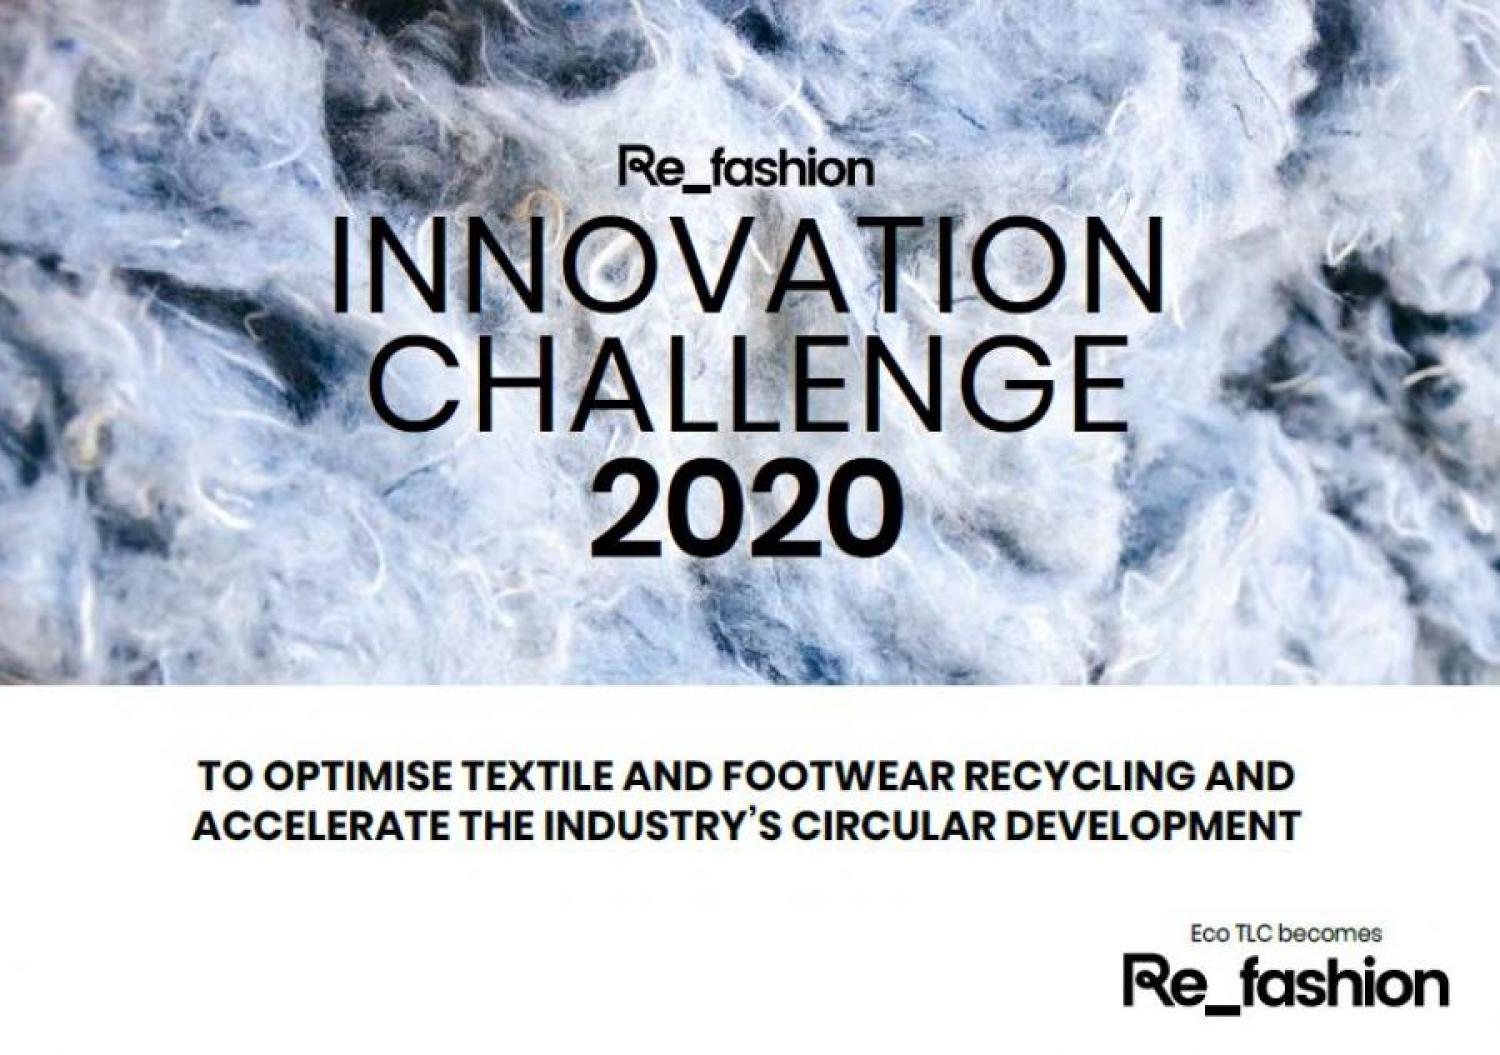 Re-Fashion challenge to accelerate textile industry’s circular development